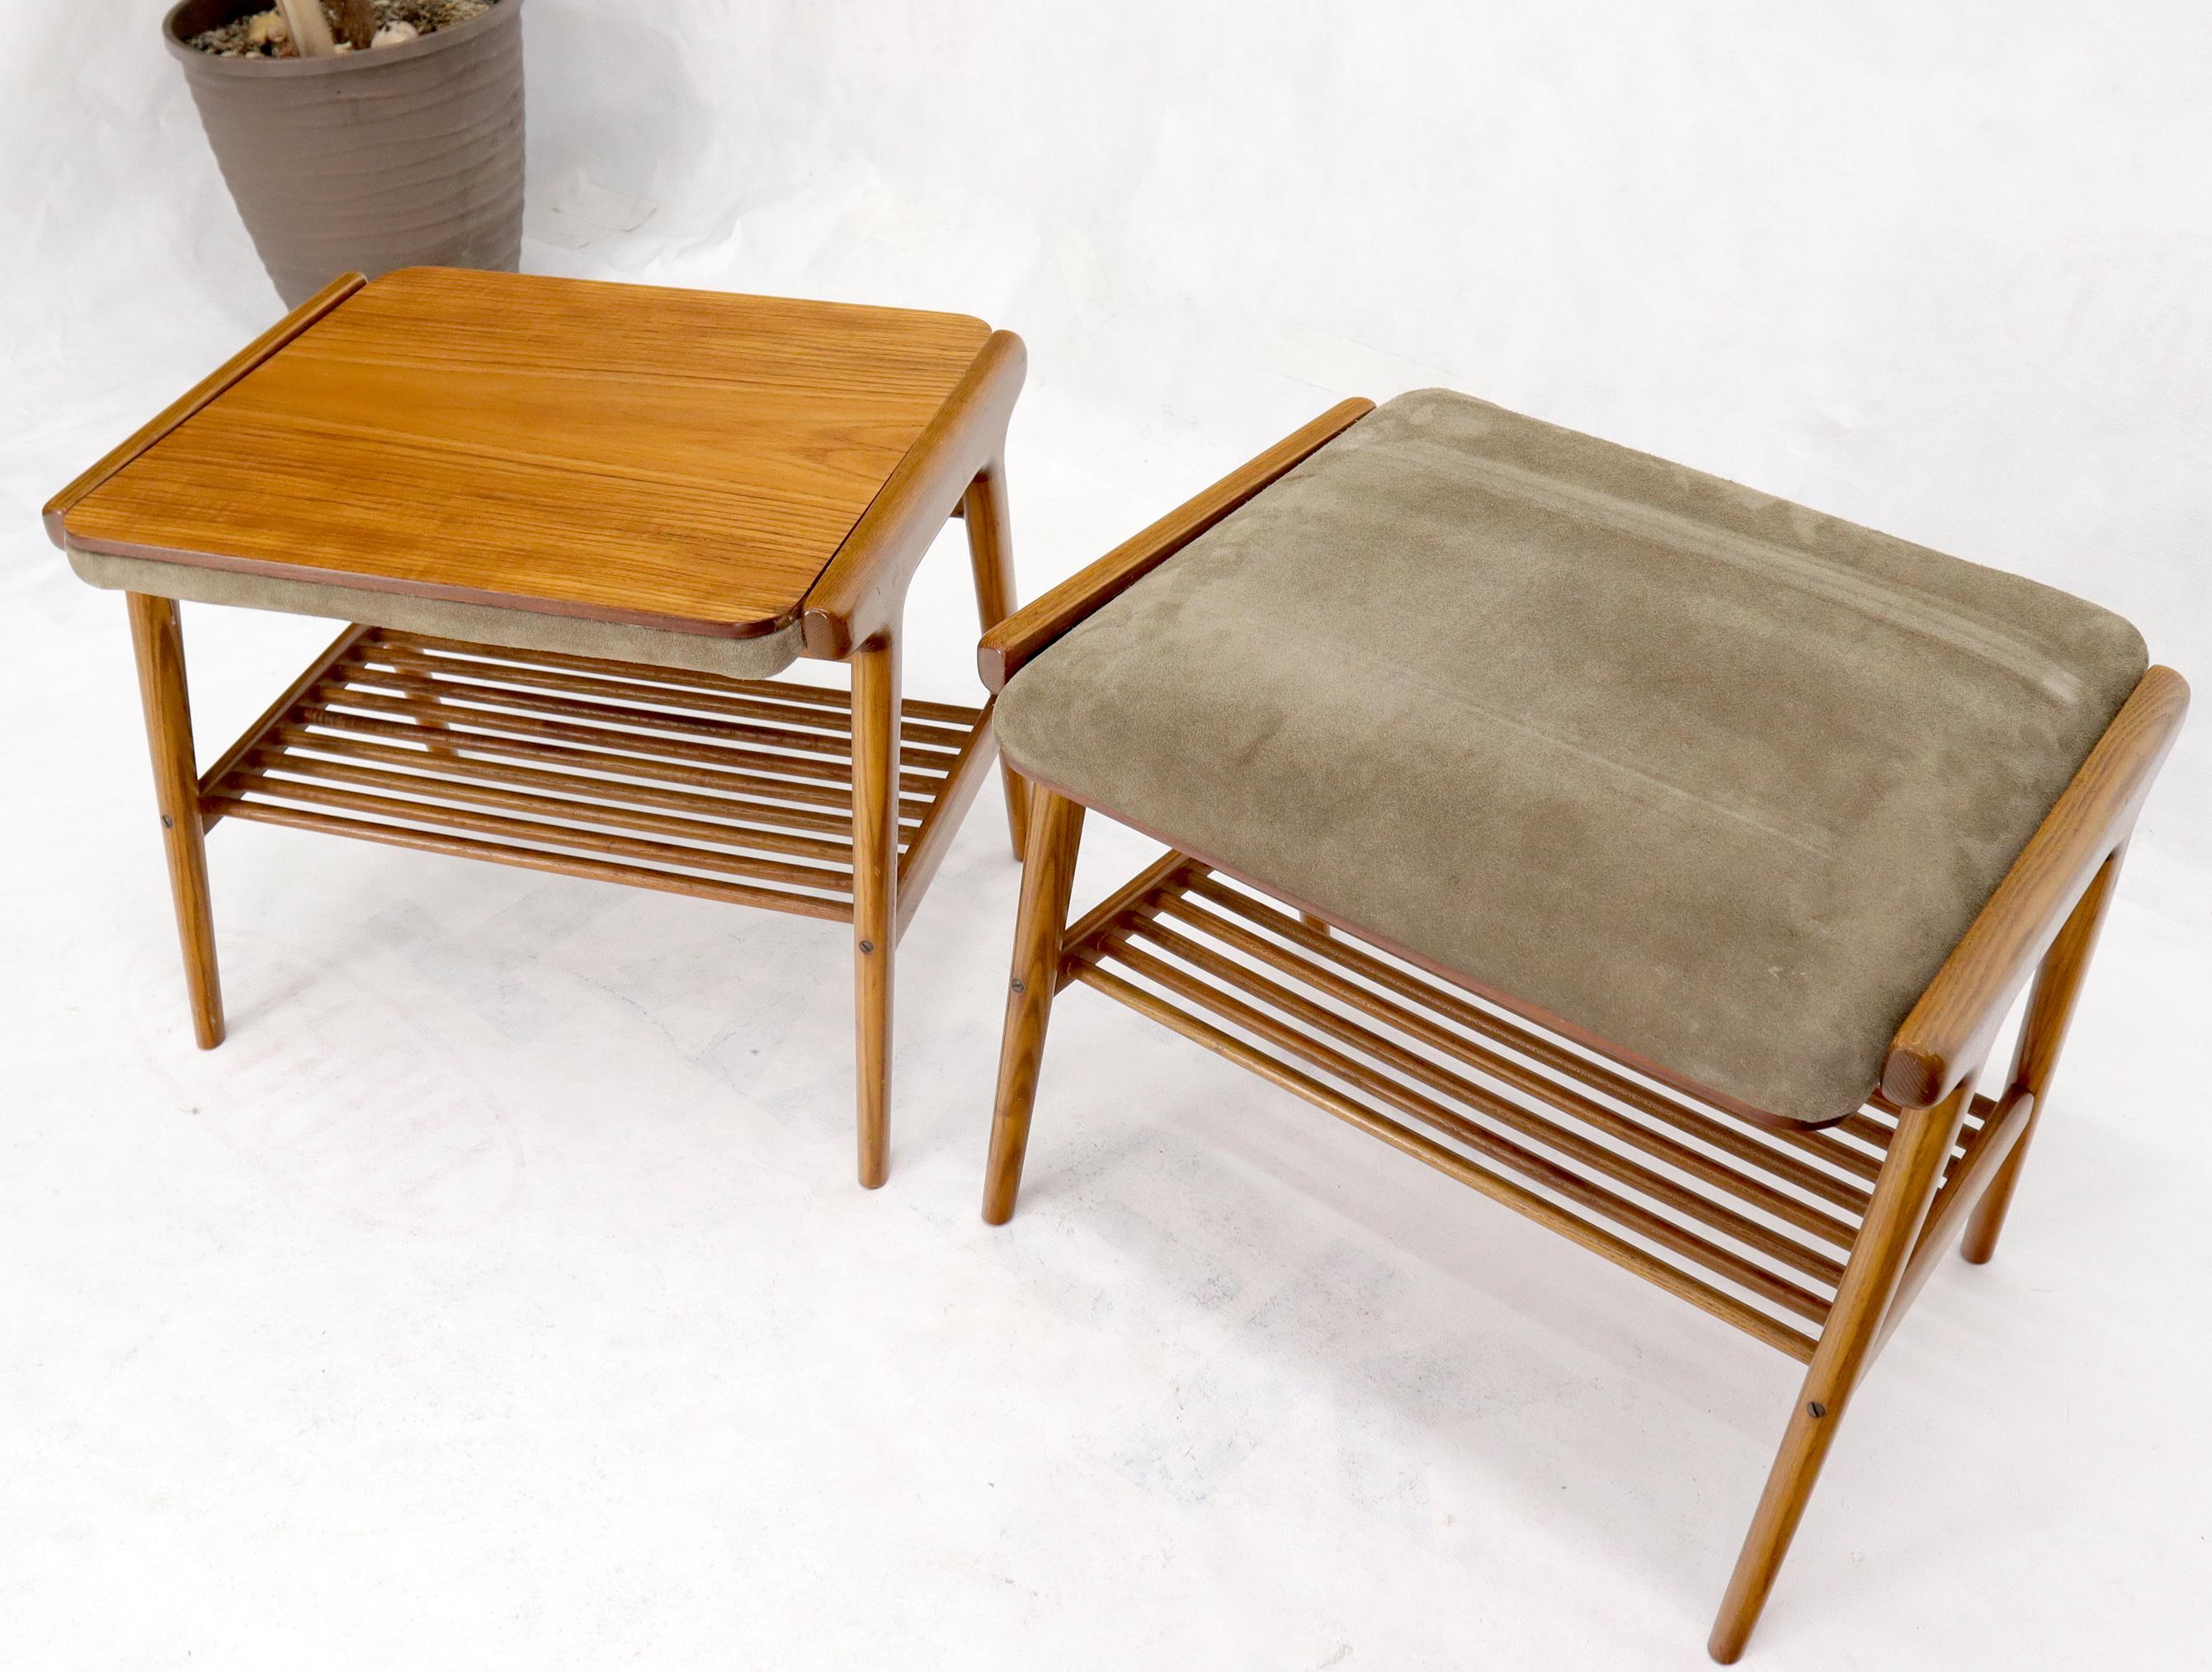 20th Century Pair of Danish Teak Mid-Century Modern Flip Top Tables Suede Benches For Sale